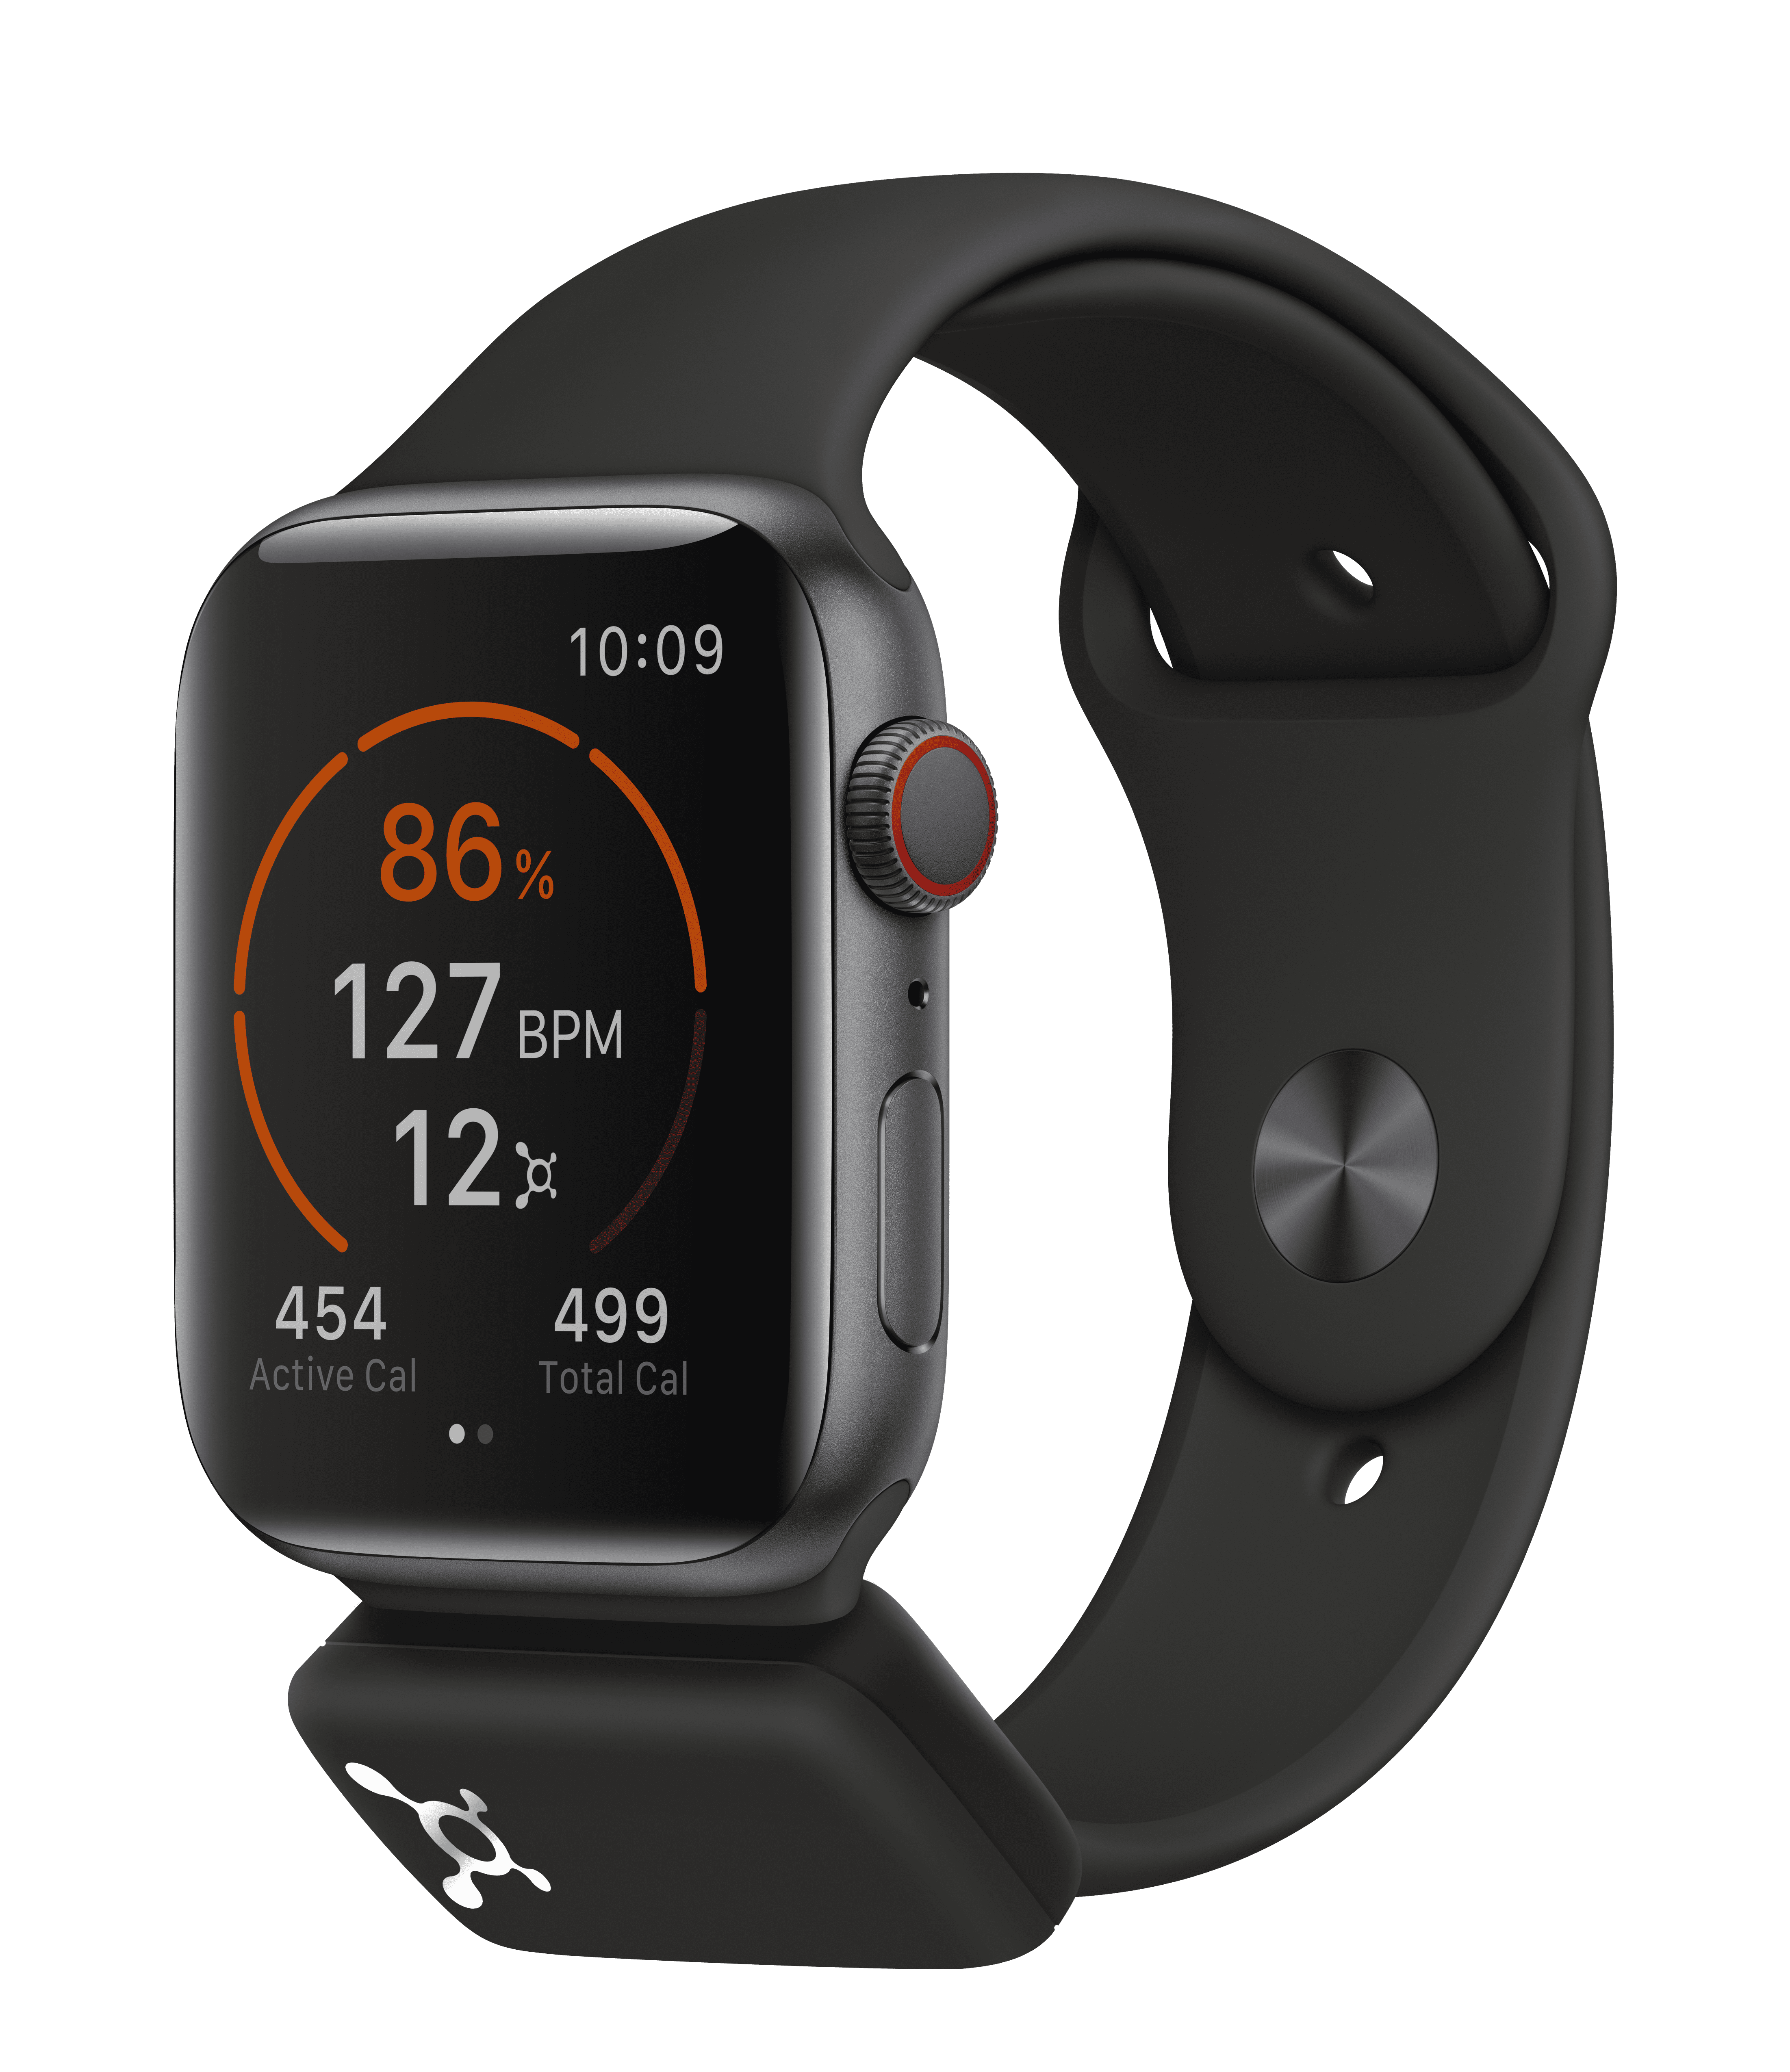 Orangetheory Fitness Shrewsbury Plaza - OTBEAT BURN can pair with your  Apple Watch! Add more accuracy to your workout 👍🏻 By connecting your  OTbeat Burn and Apple Watch, it allows you to